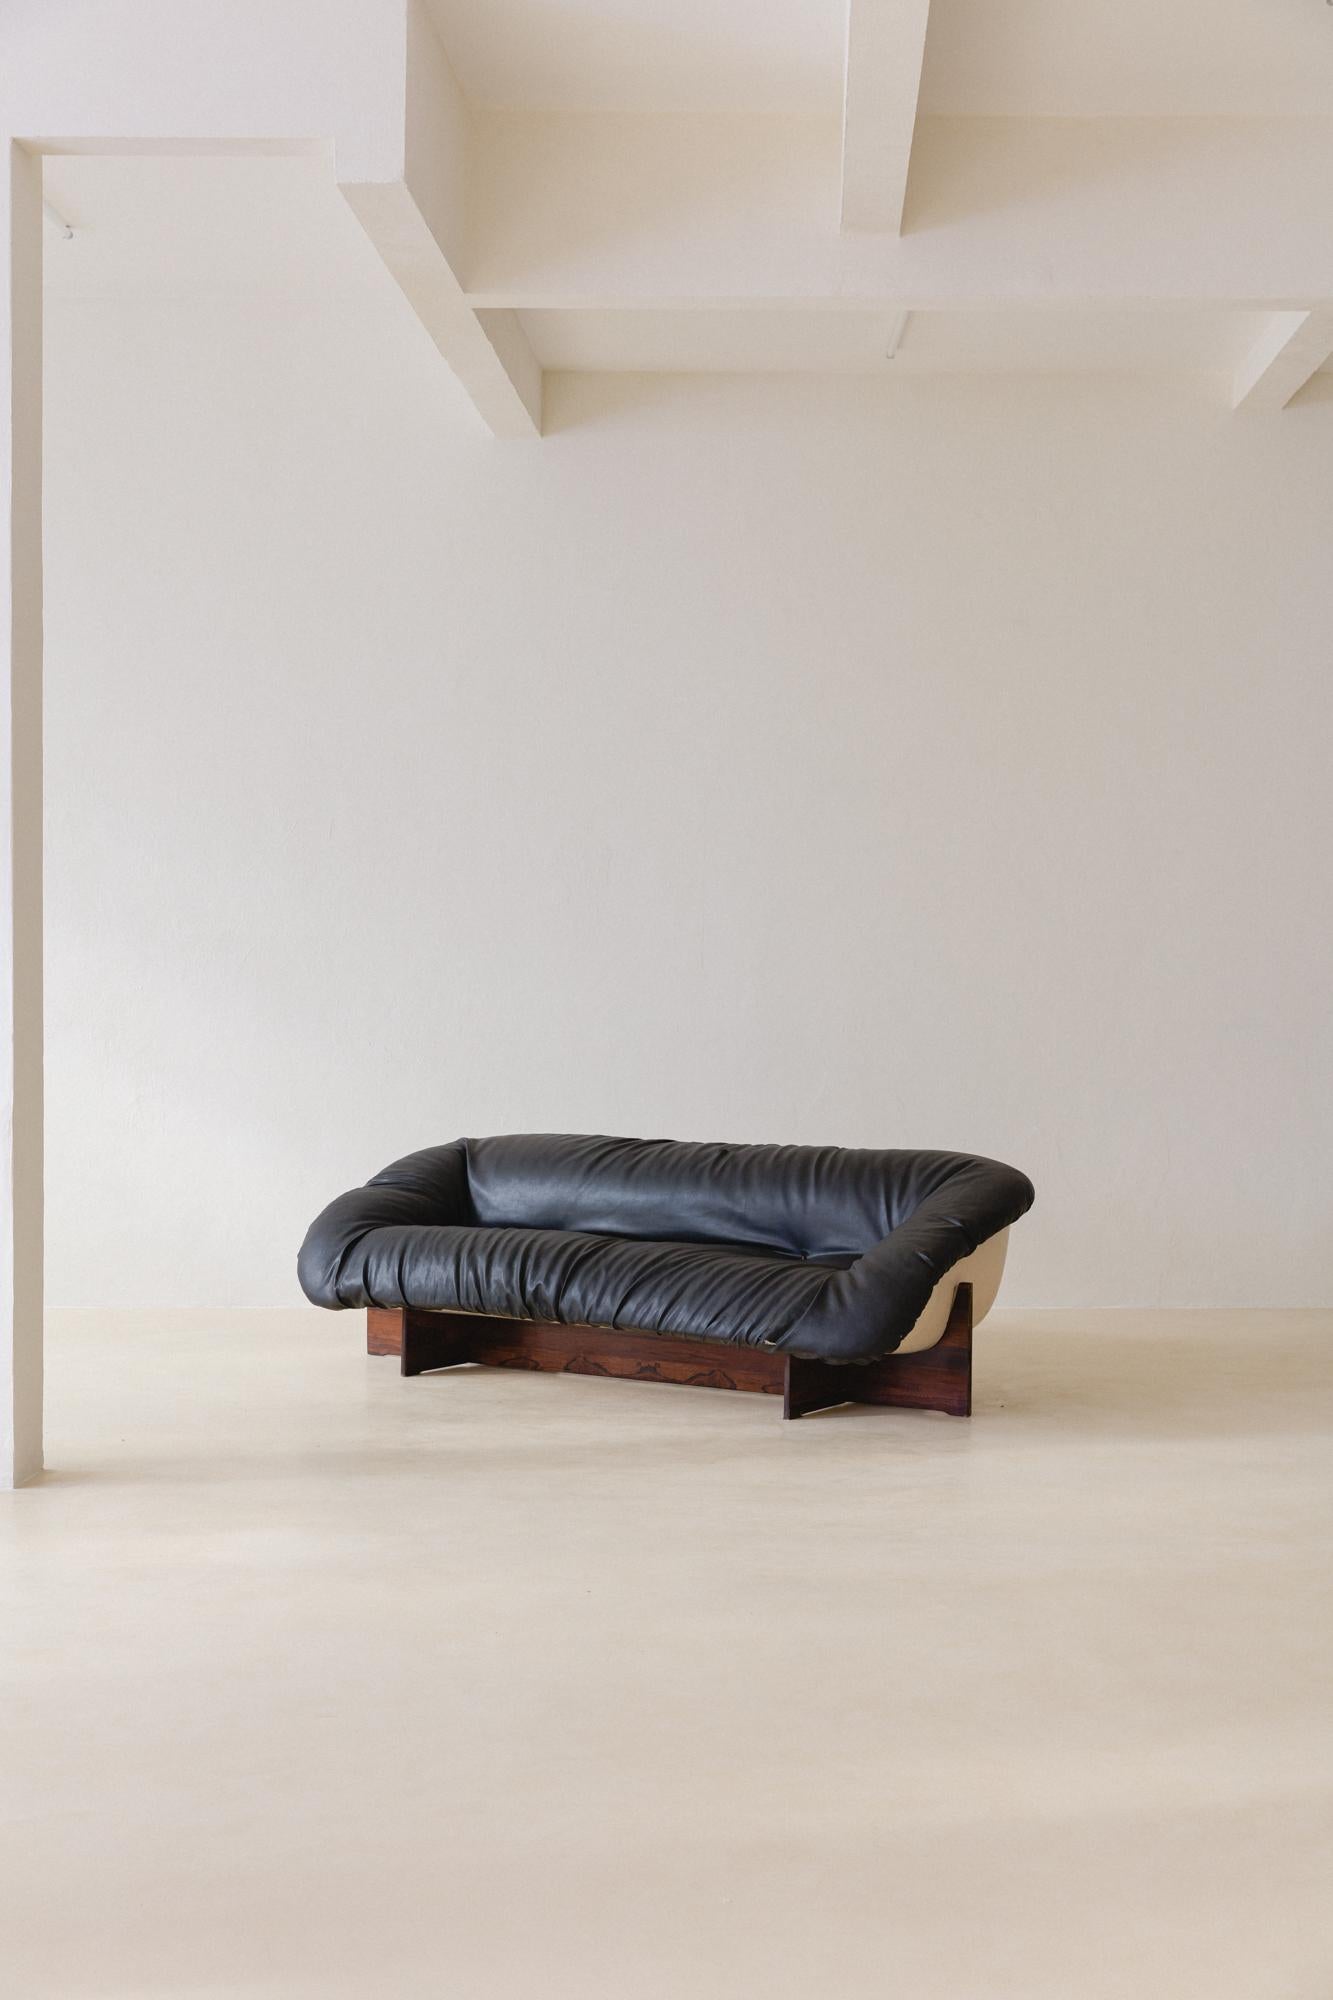 Sofa Mp-61 in Rosewood by Brazilian Designer Percival Lafer, 1973 For Sale 2